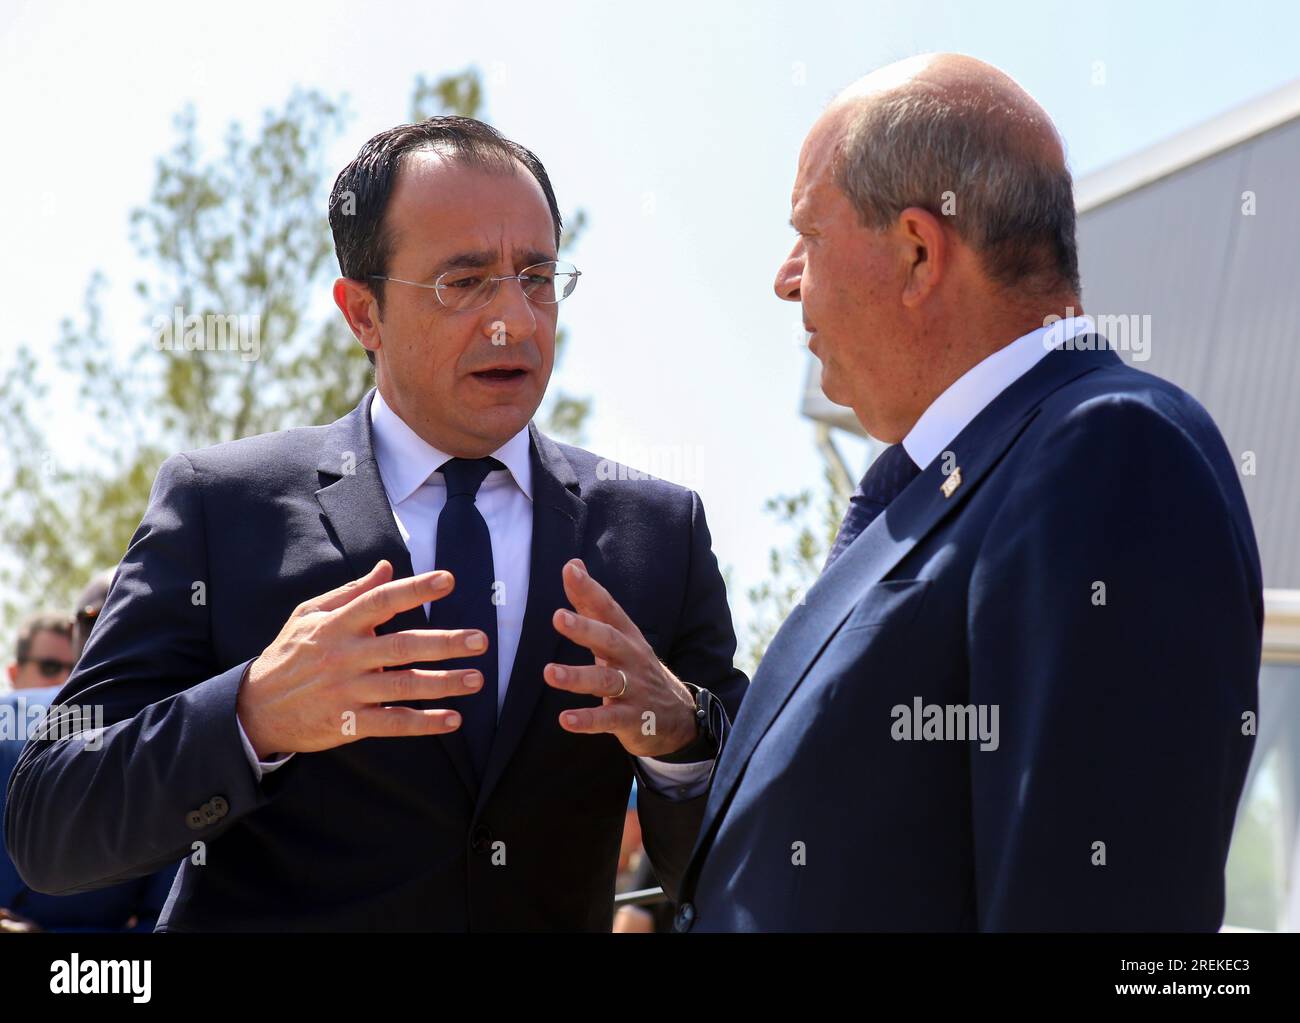 Nicosia, Cyprus. 28th July, 2023. Cyprus' President Nikos Christodoulides (L) and Turkish Cypriot leader Ersin Tatar talk after their meeting at the headquarters of the United Nations (UN)-led Committee on Missing Persons (CMP) in the old Nicosia airport complex in Nicosia, Cyprus, on July 28, 2023. Leaders of ethnically divided Cyprus held a meeting on Friday, jointly appealing to people to provide information that would help locate missing persons in conflicts, which date back almost to the establishment of the Cypriot state. Credit: George Christophorou/Xinhua/Alamy Live News Stock Photo